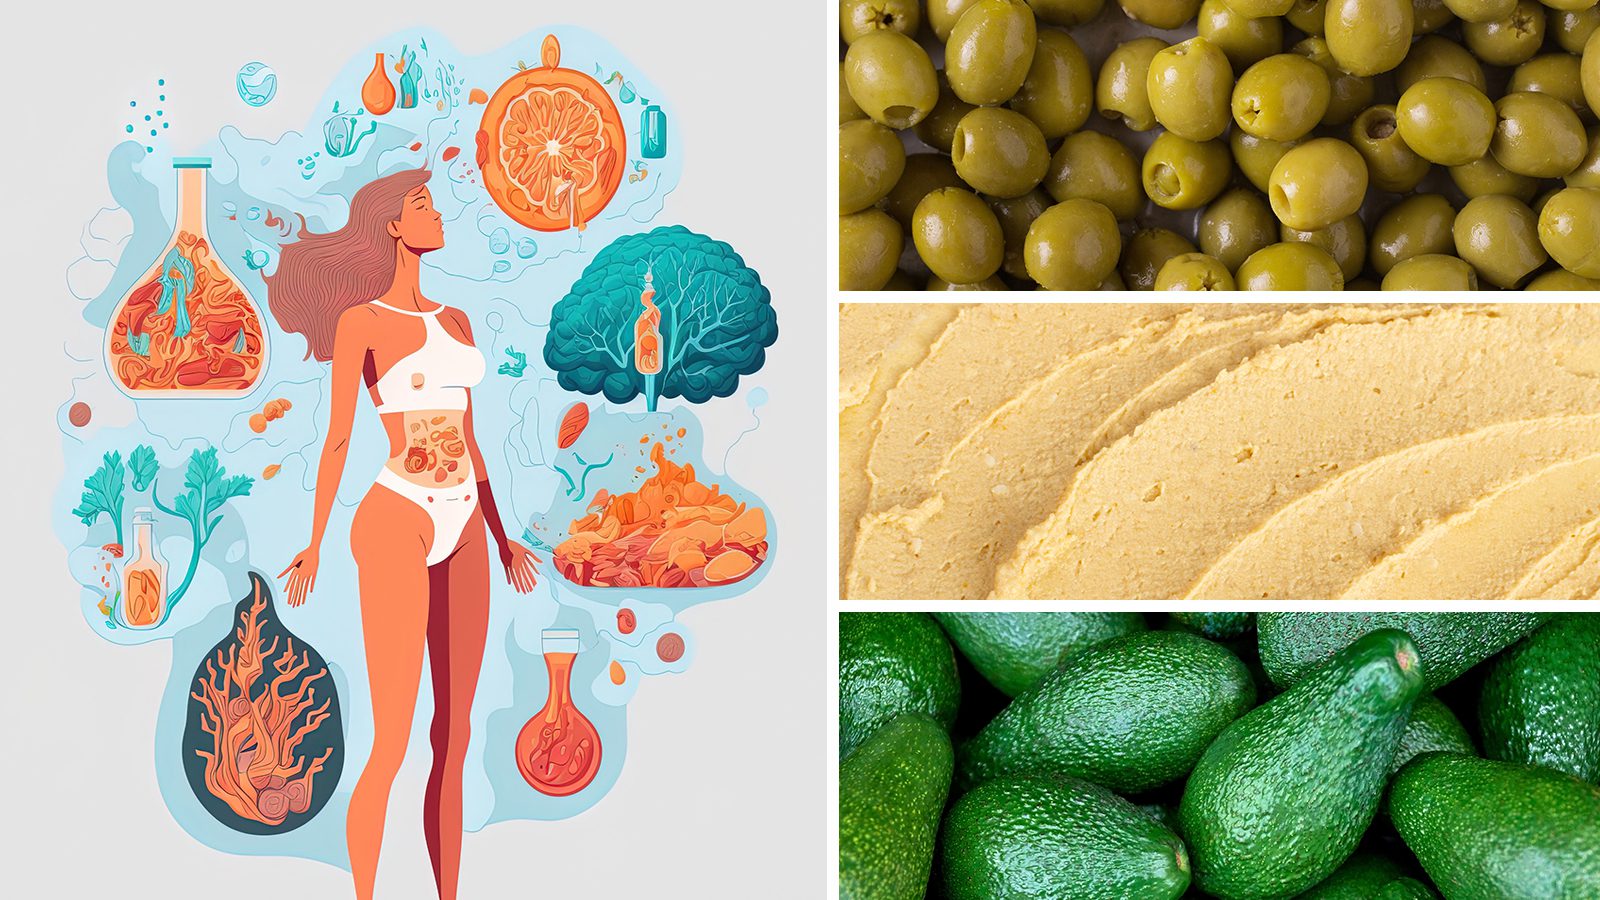 Doctors Reveal 6 Foods That Give You Energy All Day Long